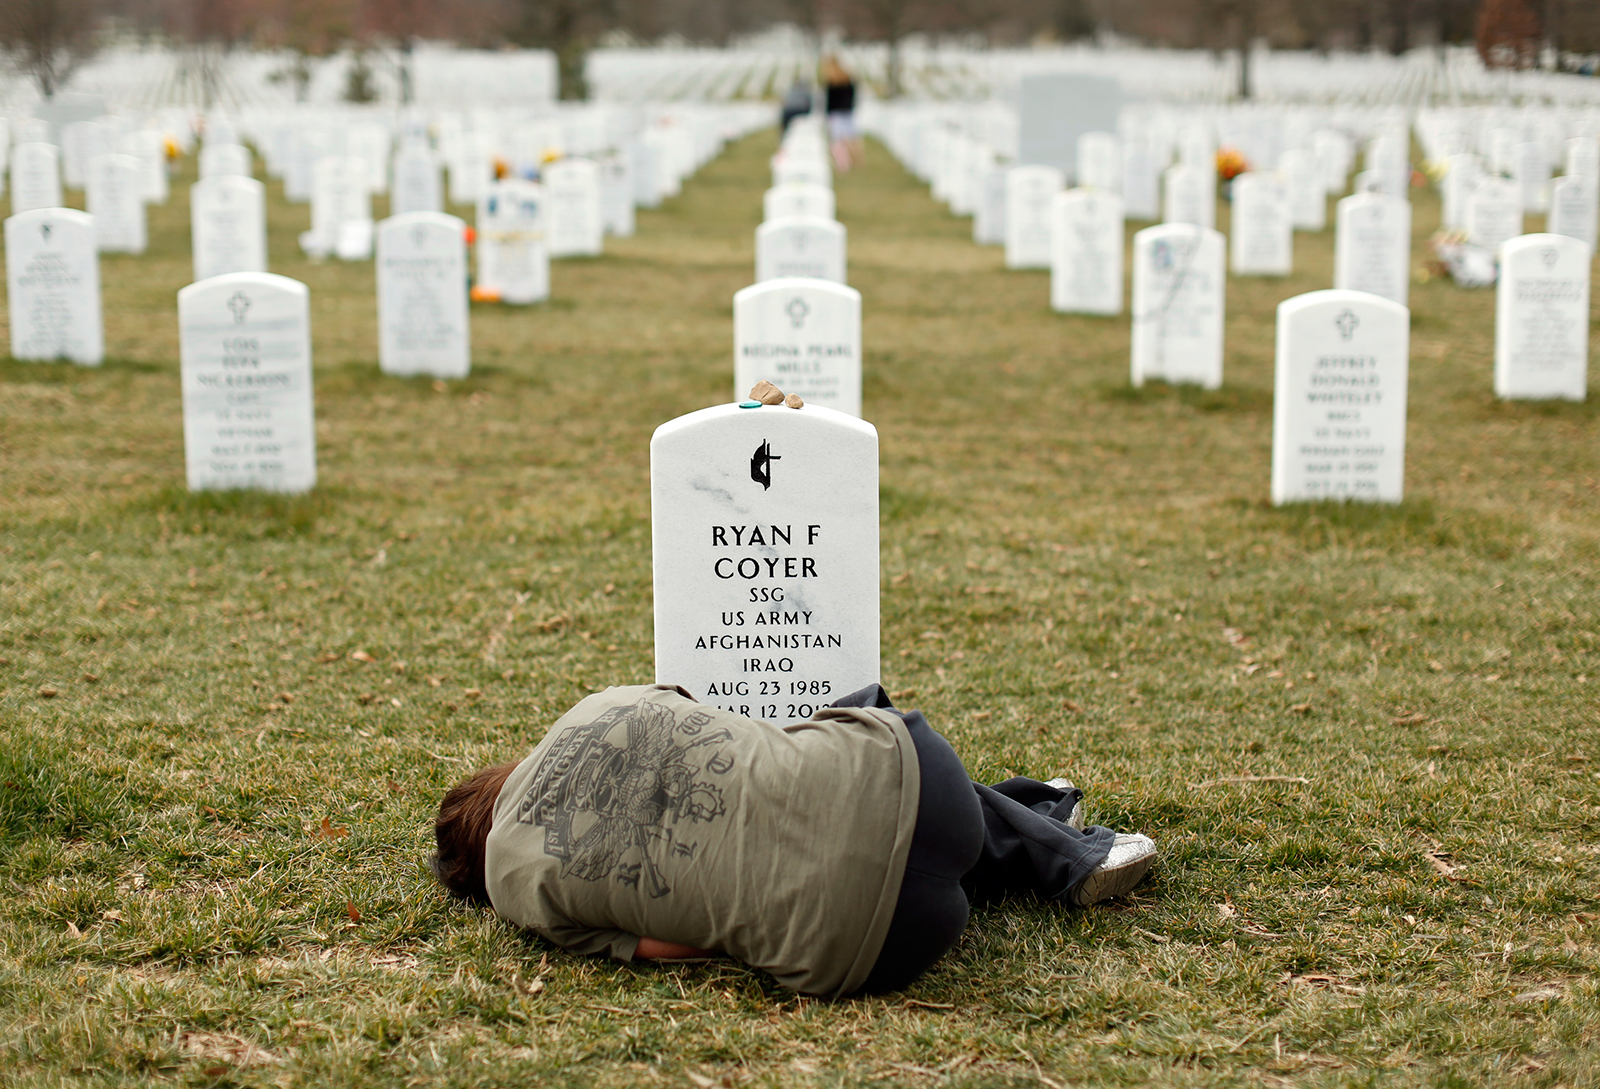 Lesleigh Coyer, 25, of Saginaw, Michigan, lies down in front of the grave of her brother, Ryan Coyer, who served with the U.S. Army in both Iraq and Afghanistan, at Arlington National Cemetery in Virginia March 11, 2013. Coyer died of complications from an injury sustained in Afghanistan.